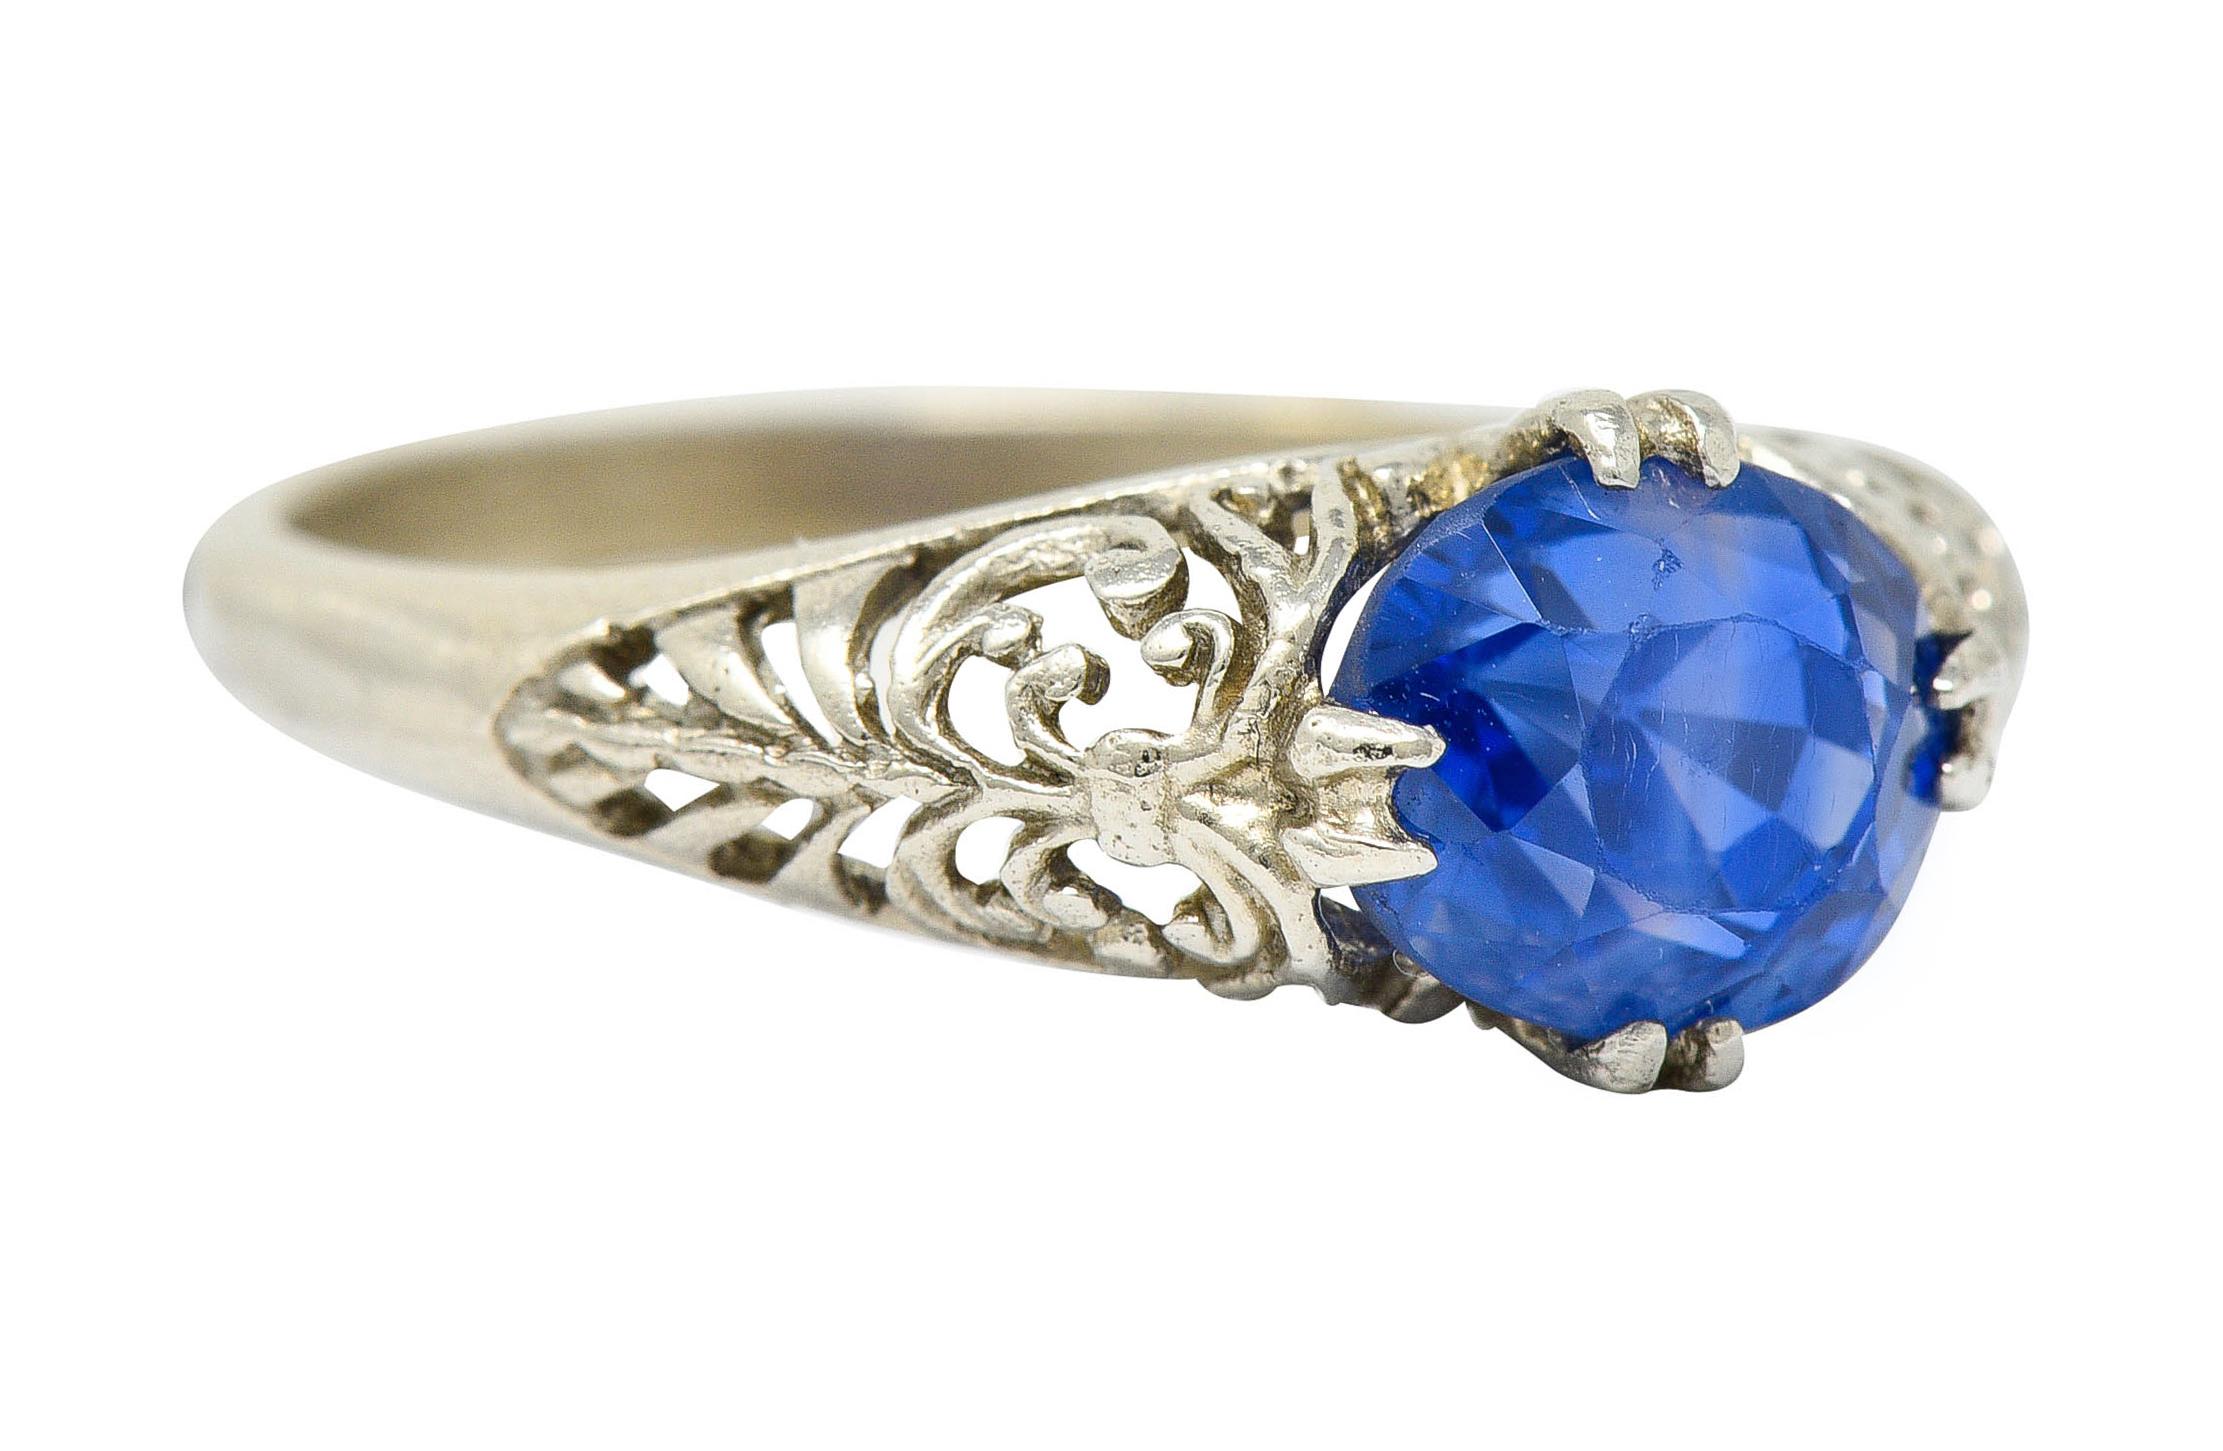 Bombè style ring centers an oval cut sapphire weighing approximately 1.90 carats

Translucent and a bright violtish blue color with moderate color banding

Set with split prongs within and elegantly pierced mounting featuring a scrolled foliate